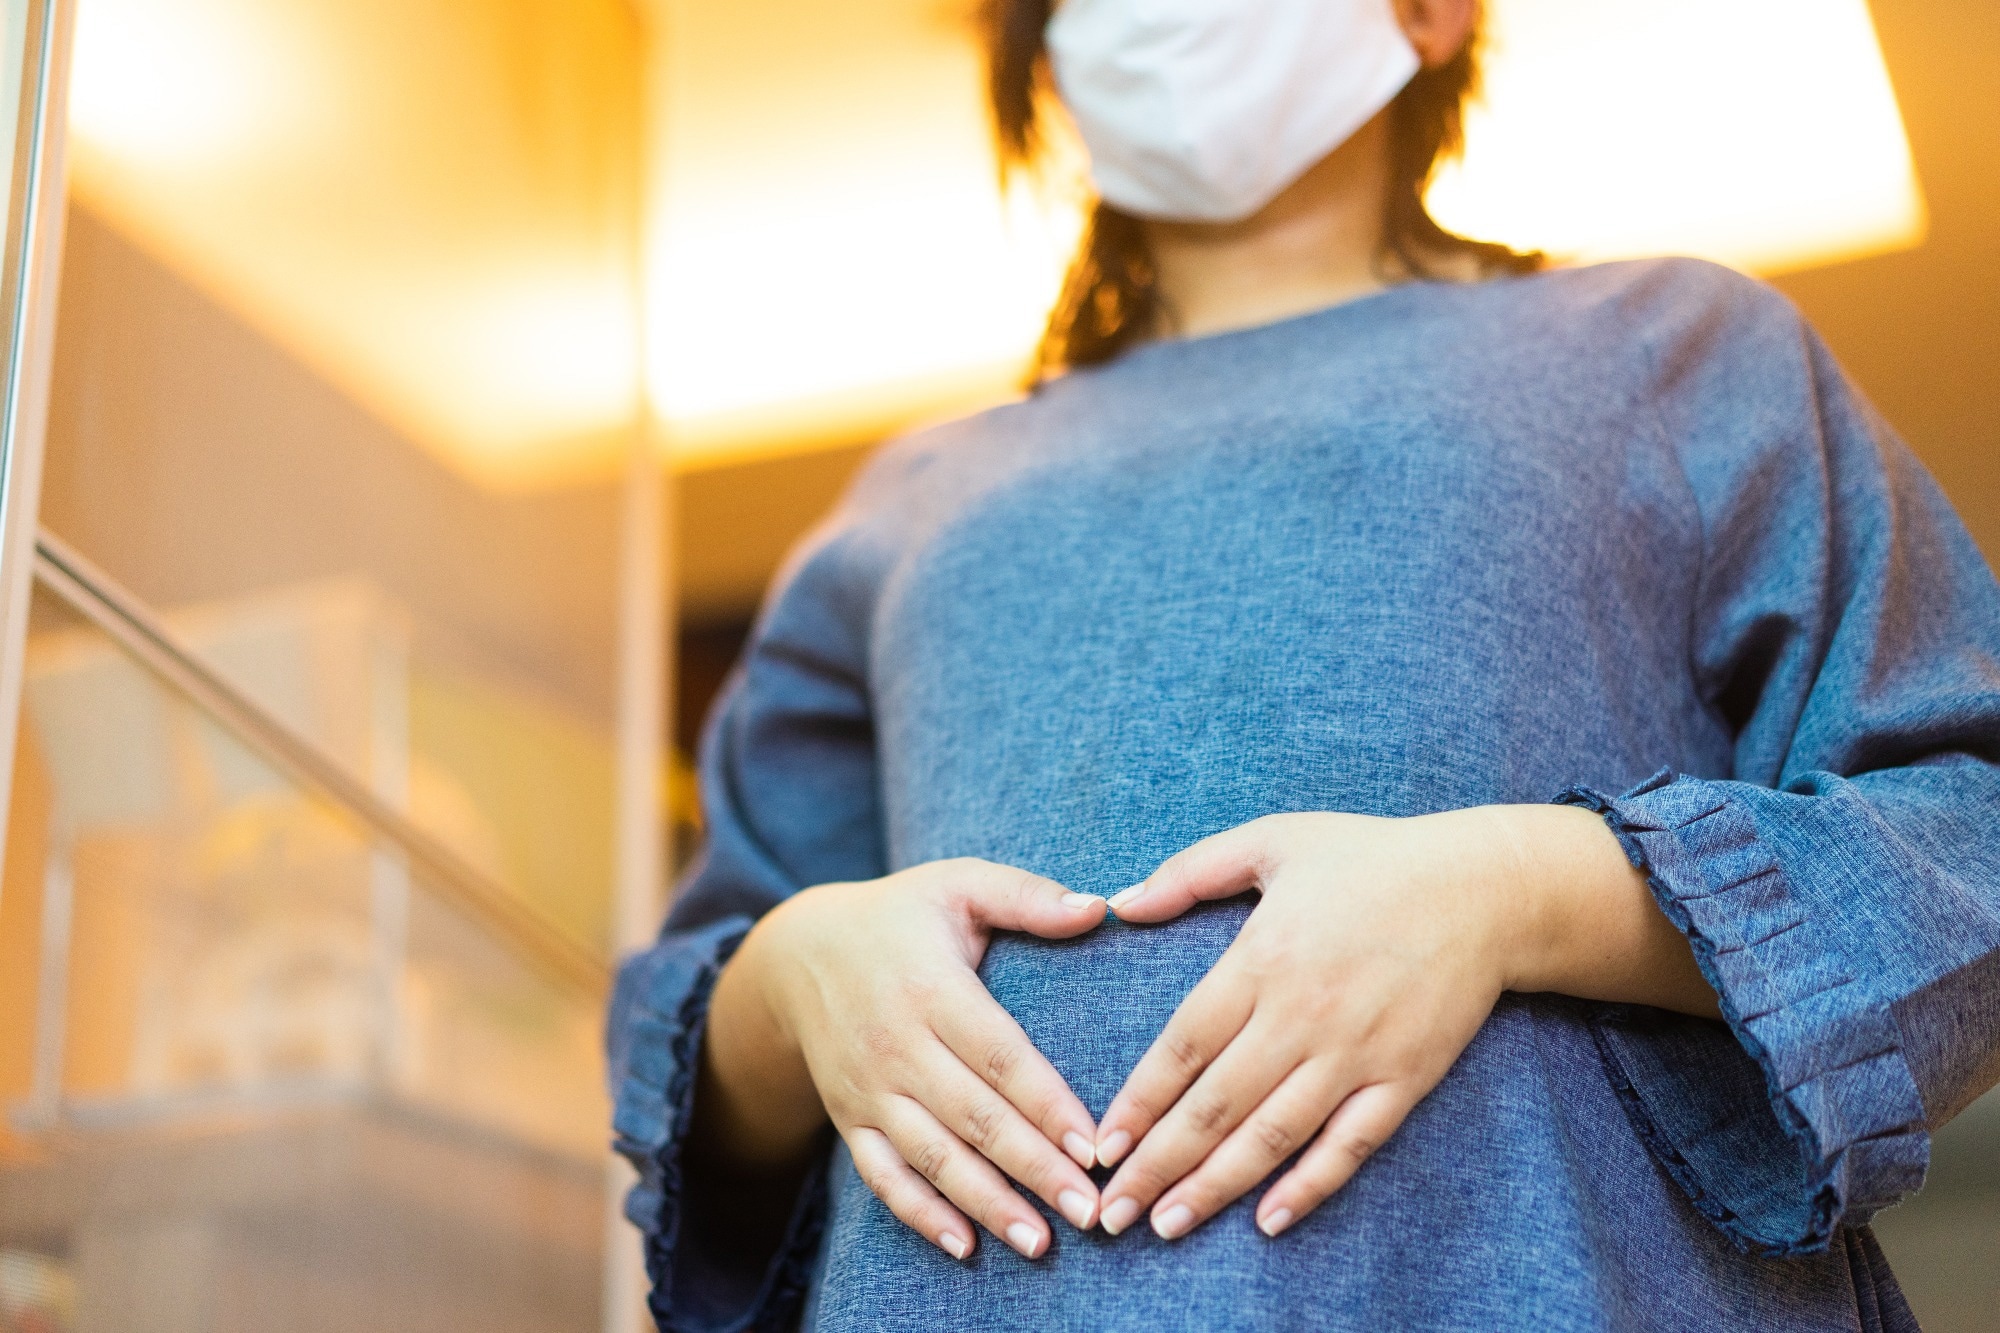 Study: Single-cell RNA sequencing reveals immunological rewiring at the maternal-fetal interface following asymptomatic / mild SARS-CoV-2 infection.  Image Credit: MIA Studio / Shutterstock